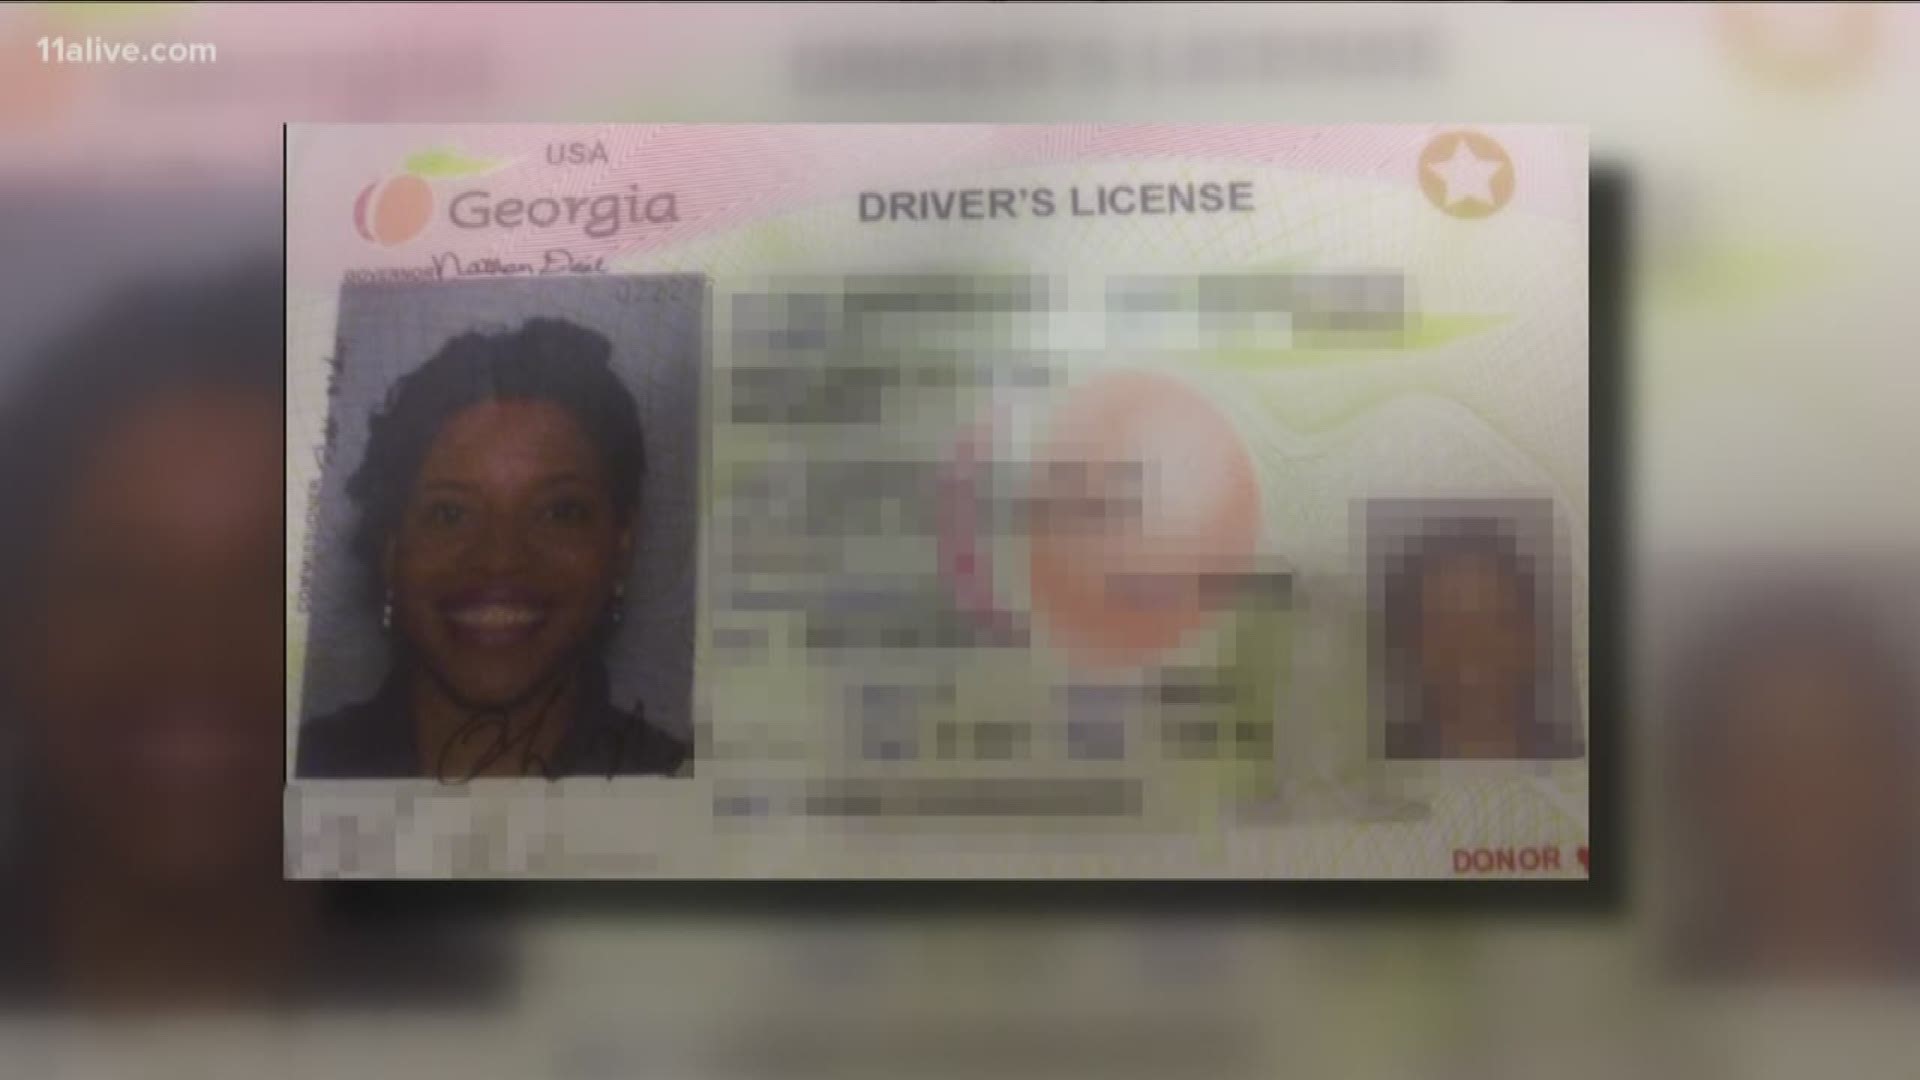 “I just Googled my name and I saw my driver’s license, the image … and I clicked on it thinking, ‘is this real?’” said Phylena Houde.